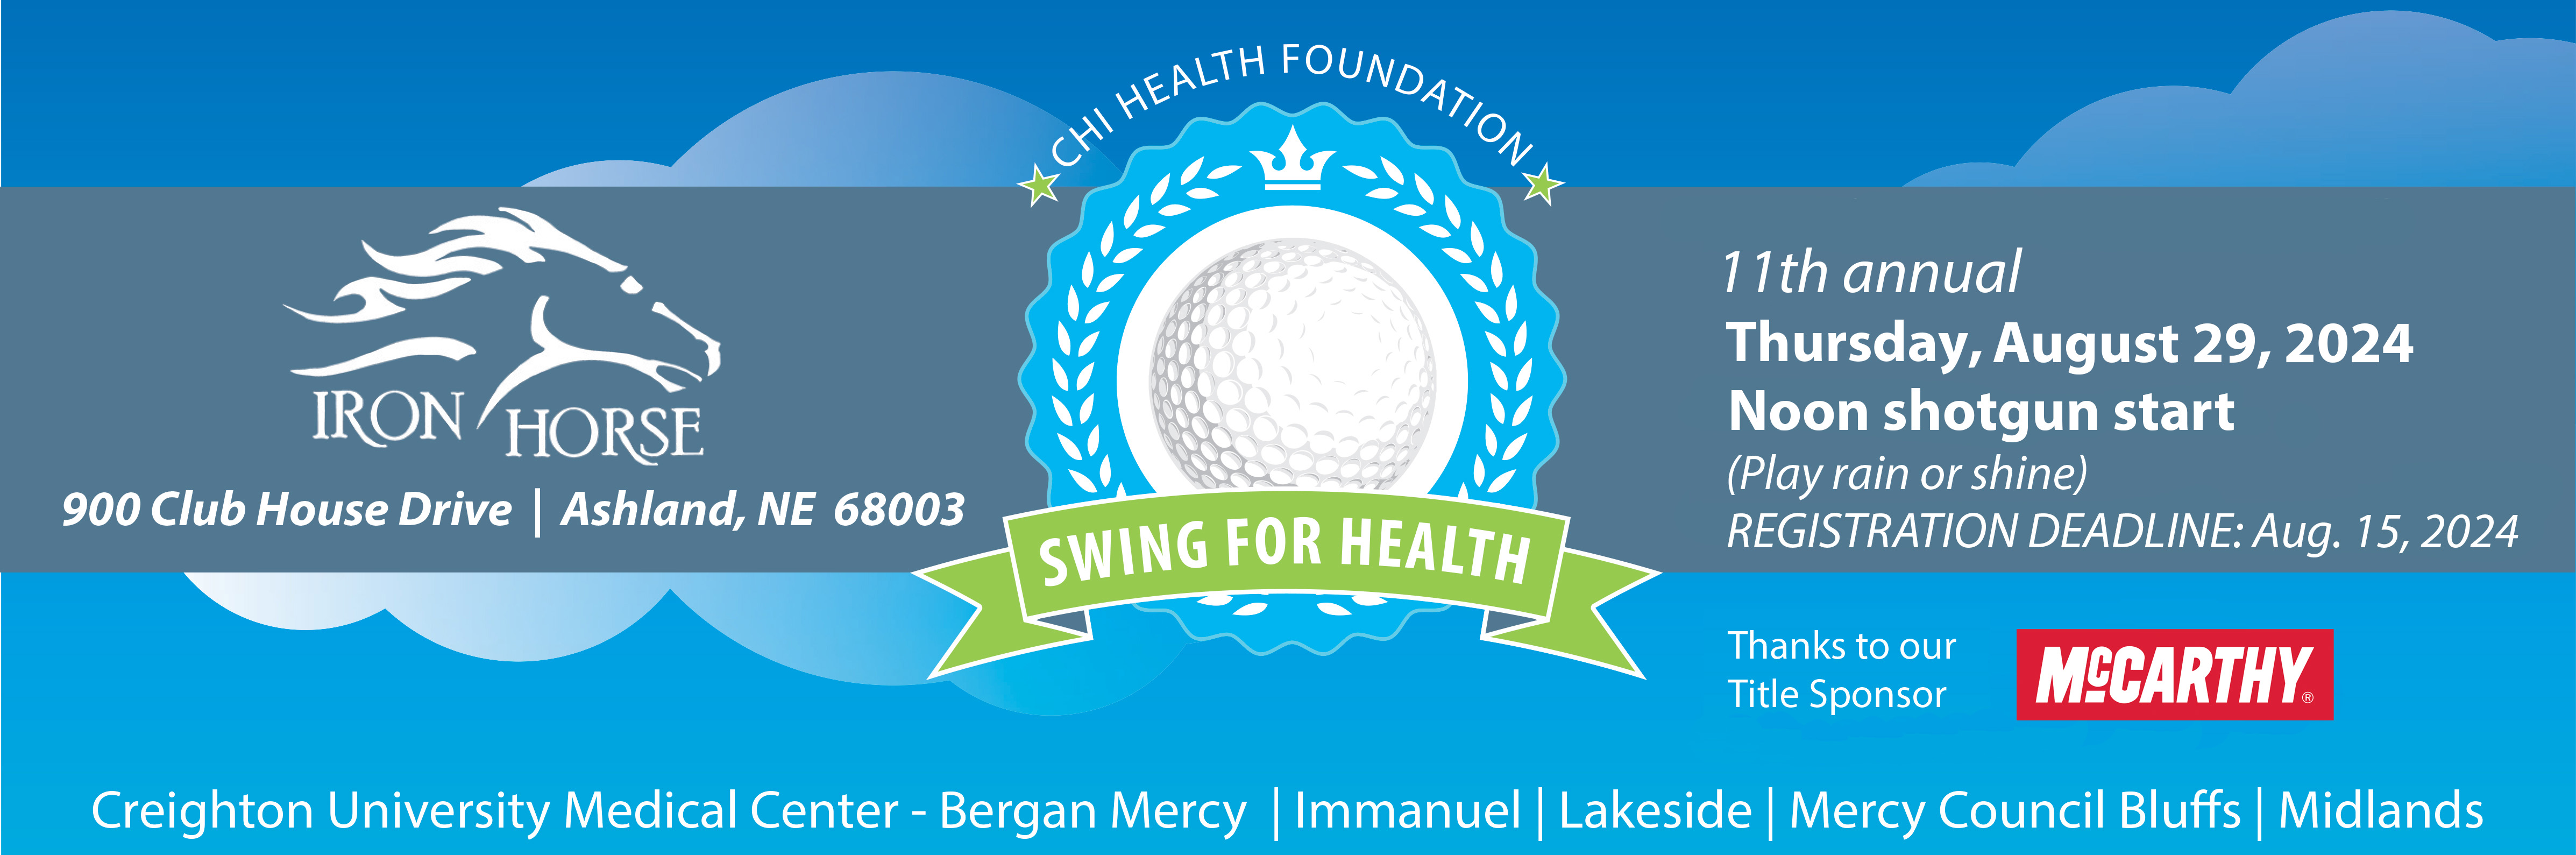 CHI Health Foundation Swing for Health banner